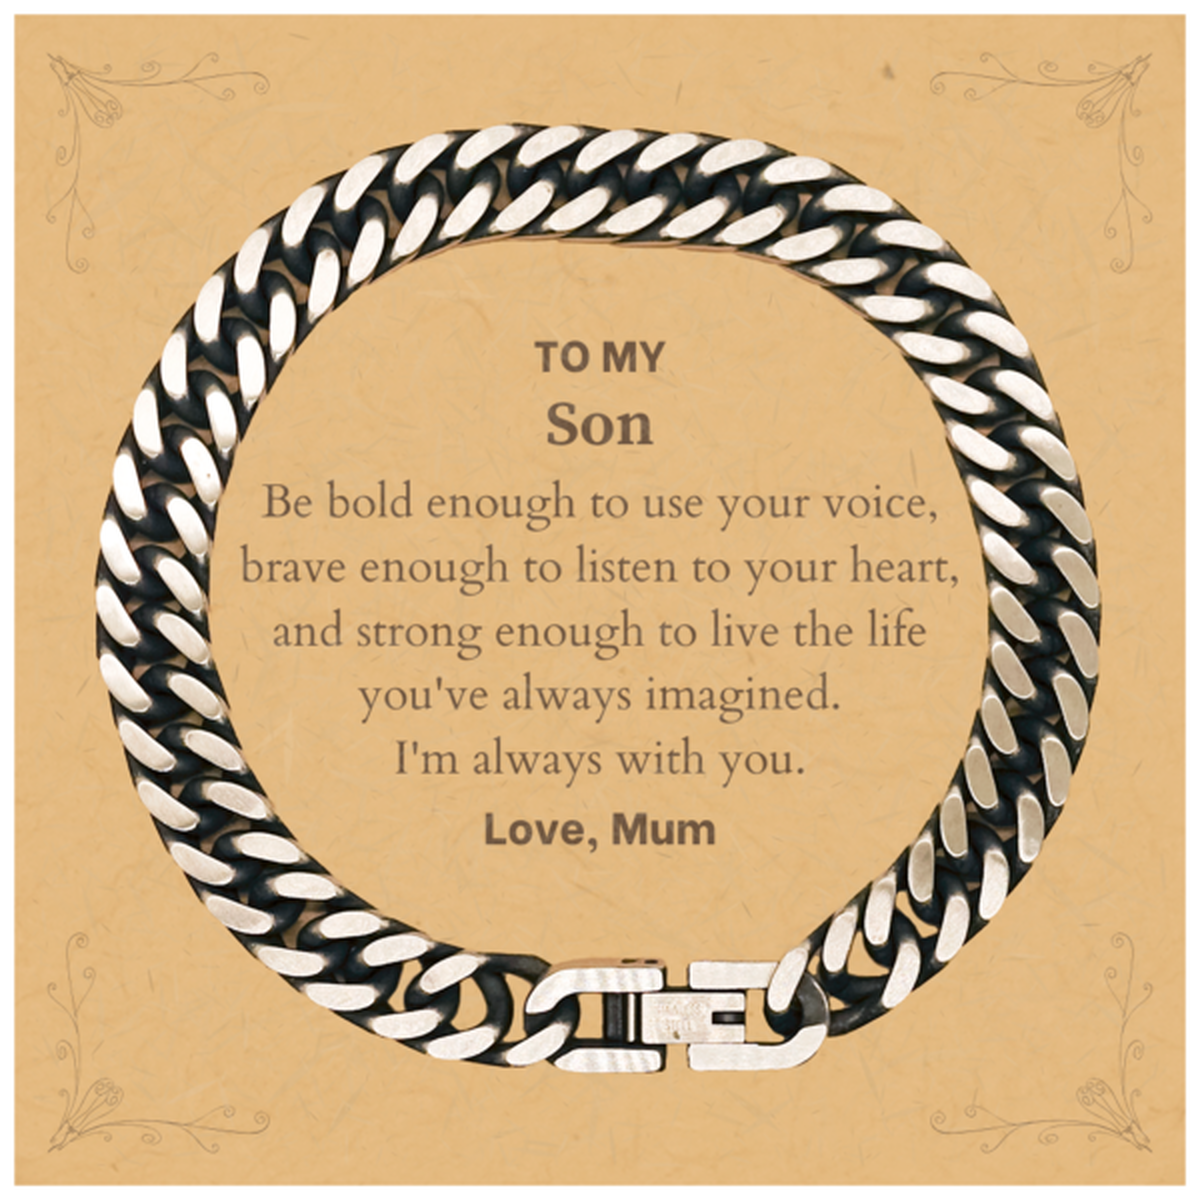 Keepsake Son Cuban Link Chain Bracelet Gift Idea Graduation Christmas Birthday Son from Mum, Son Be bold enough to use your voice, brave enough to listen to your heart. Love, Mum